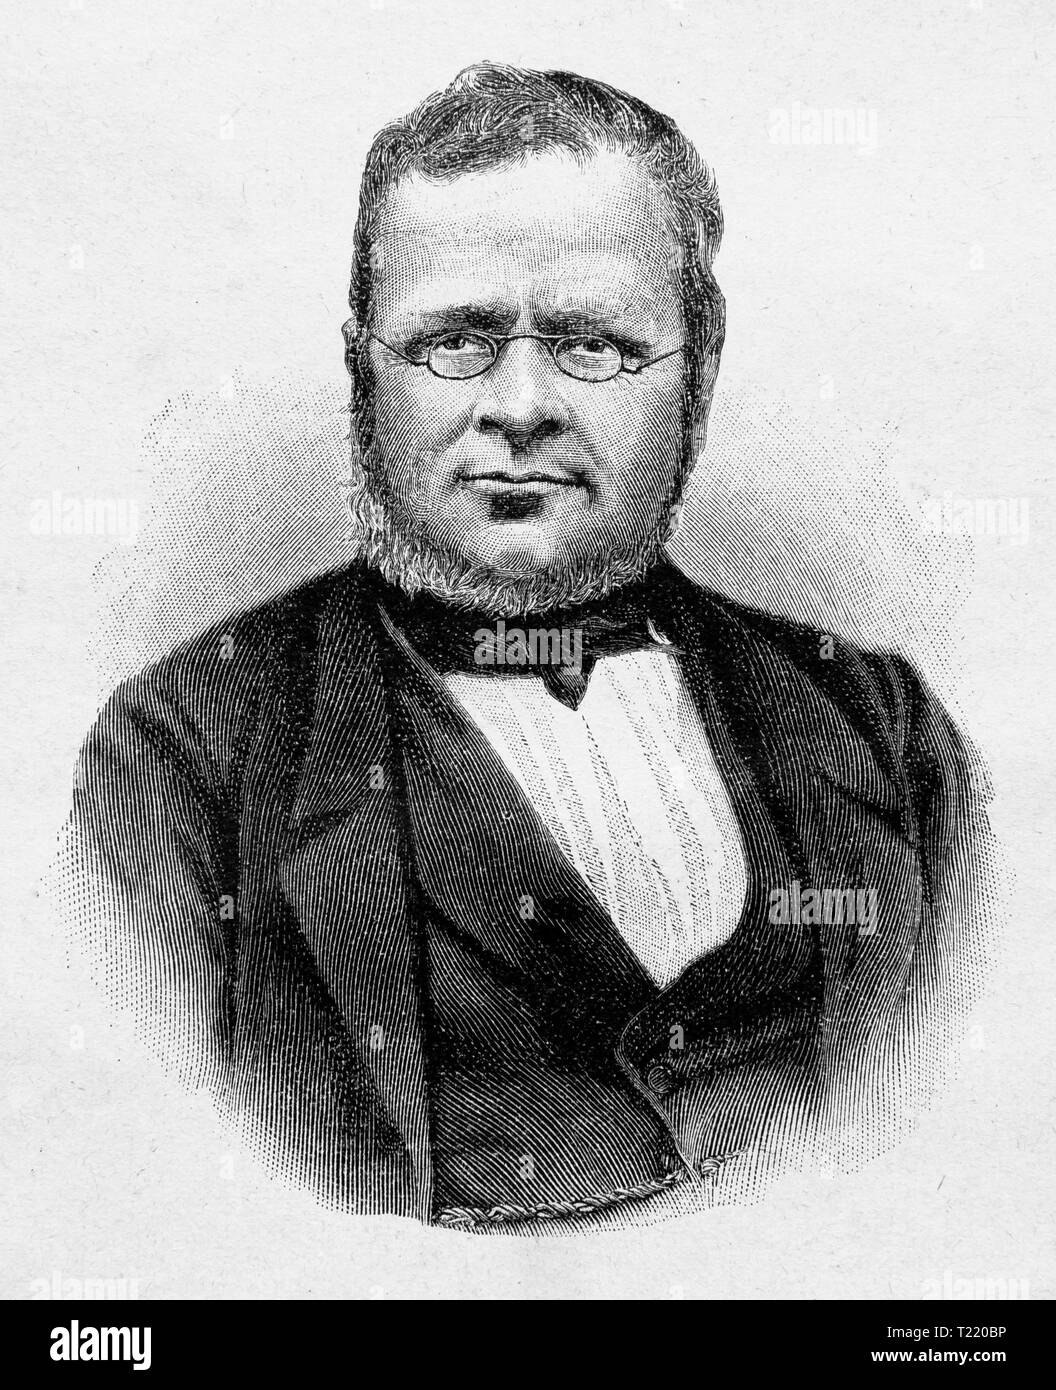 Count of Cavour, Italian statesman, Prime Minister of the Kingdom of Piedmont-Sardinia, Digital improved reproduction from Illustrated overview of the life of mankind in the 19th century, 1901 edition, Marx publishing house, St. Petersburg. Stock Photo